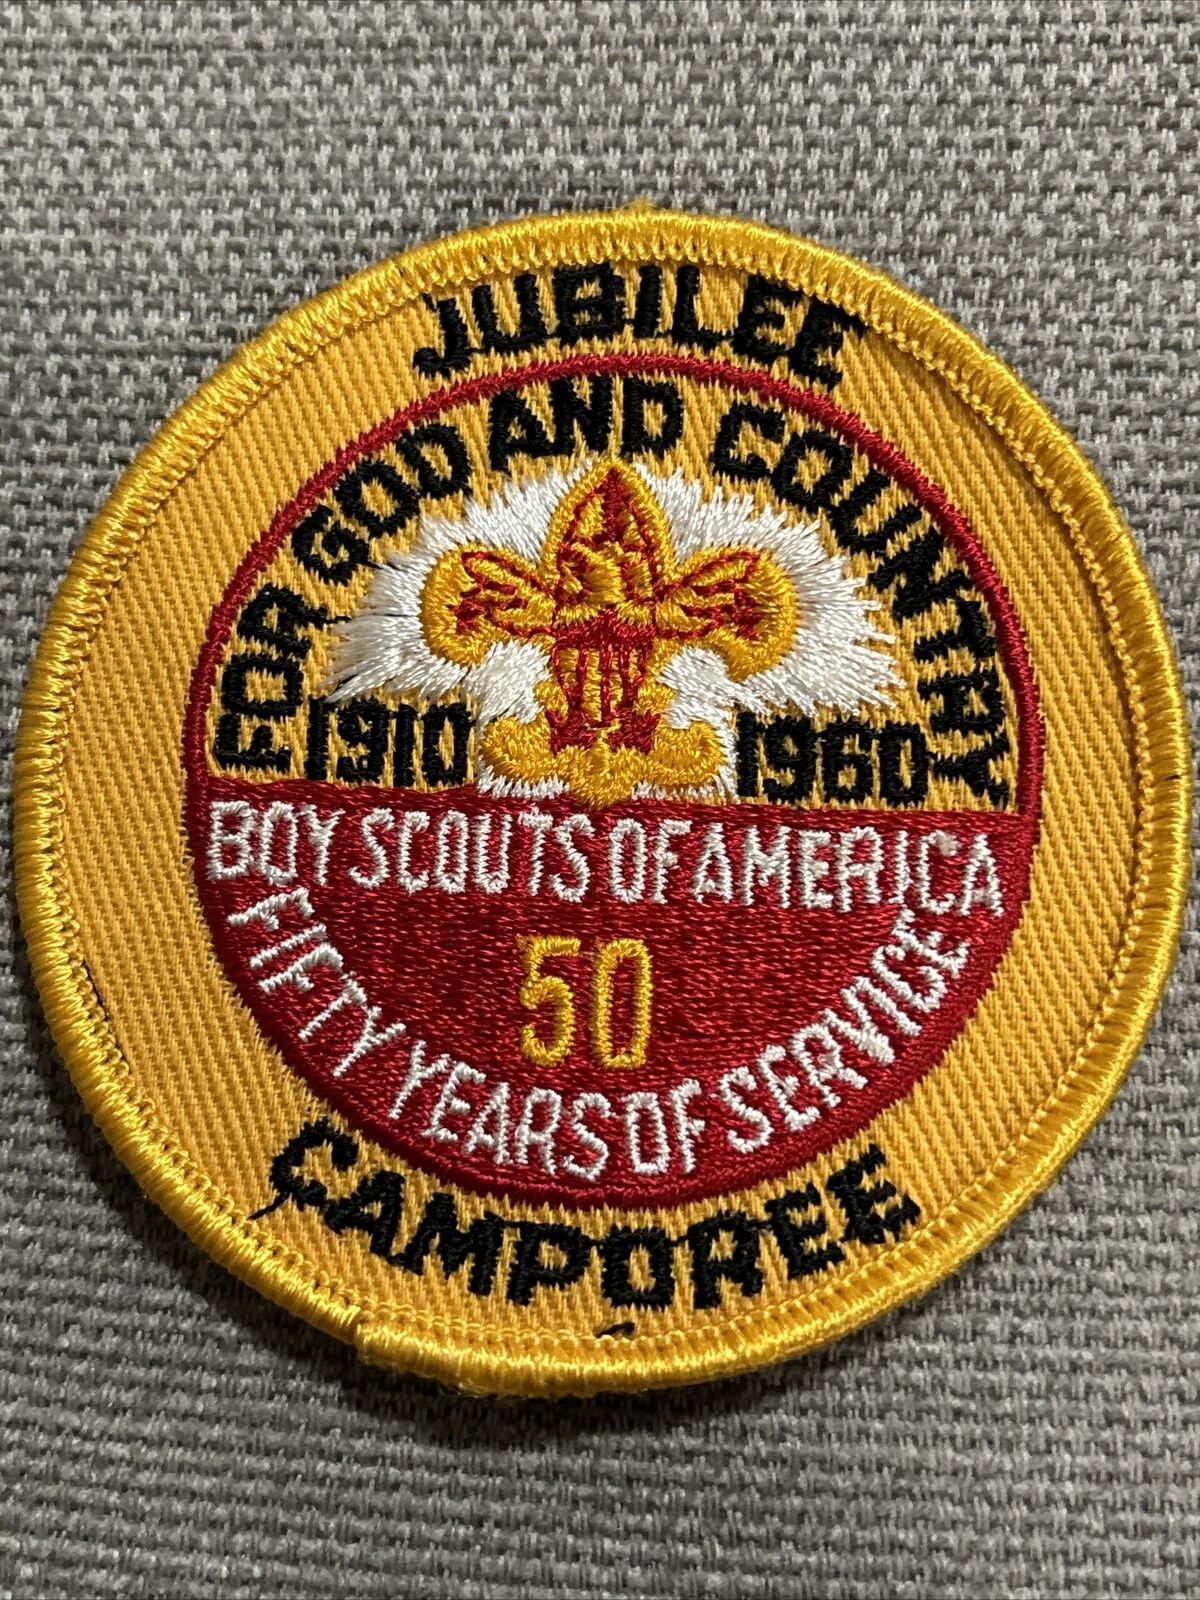 Boy Scout 1960 Jubilee Camporee 50 Years Patch